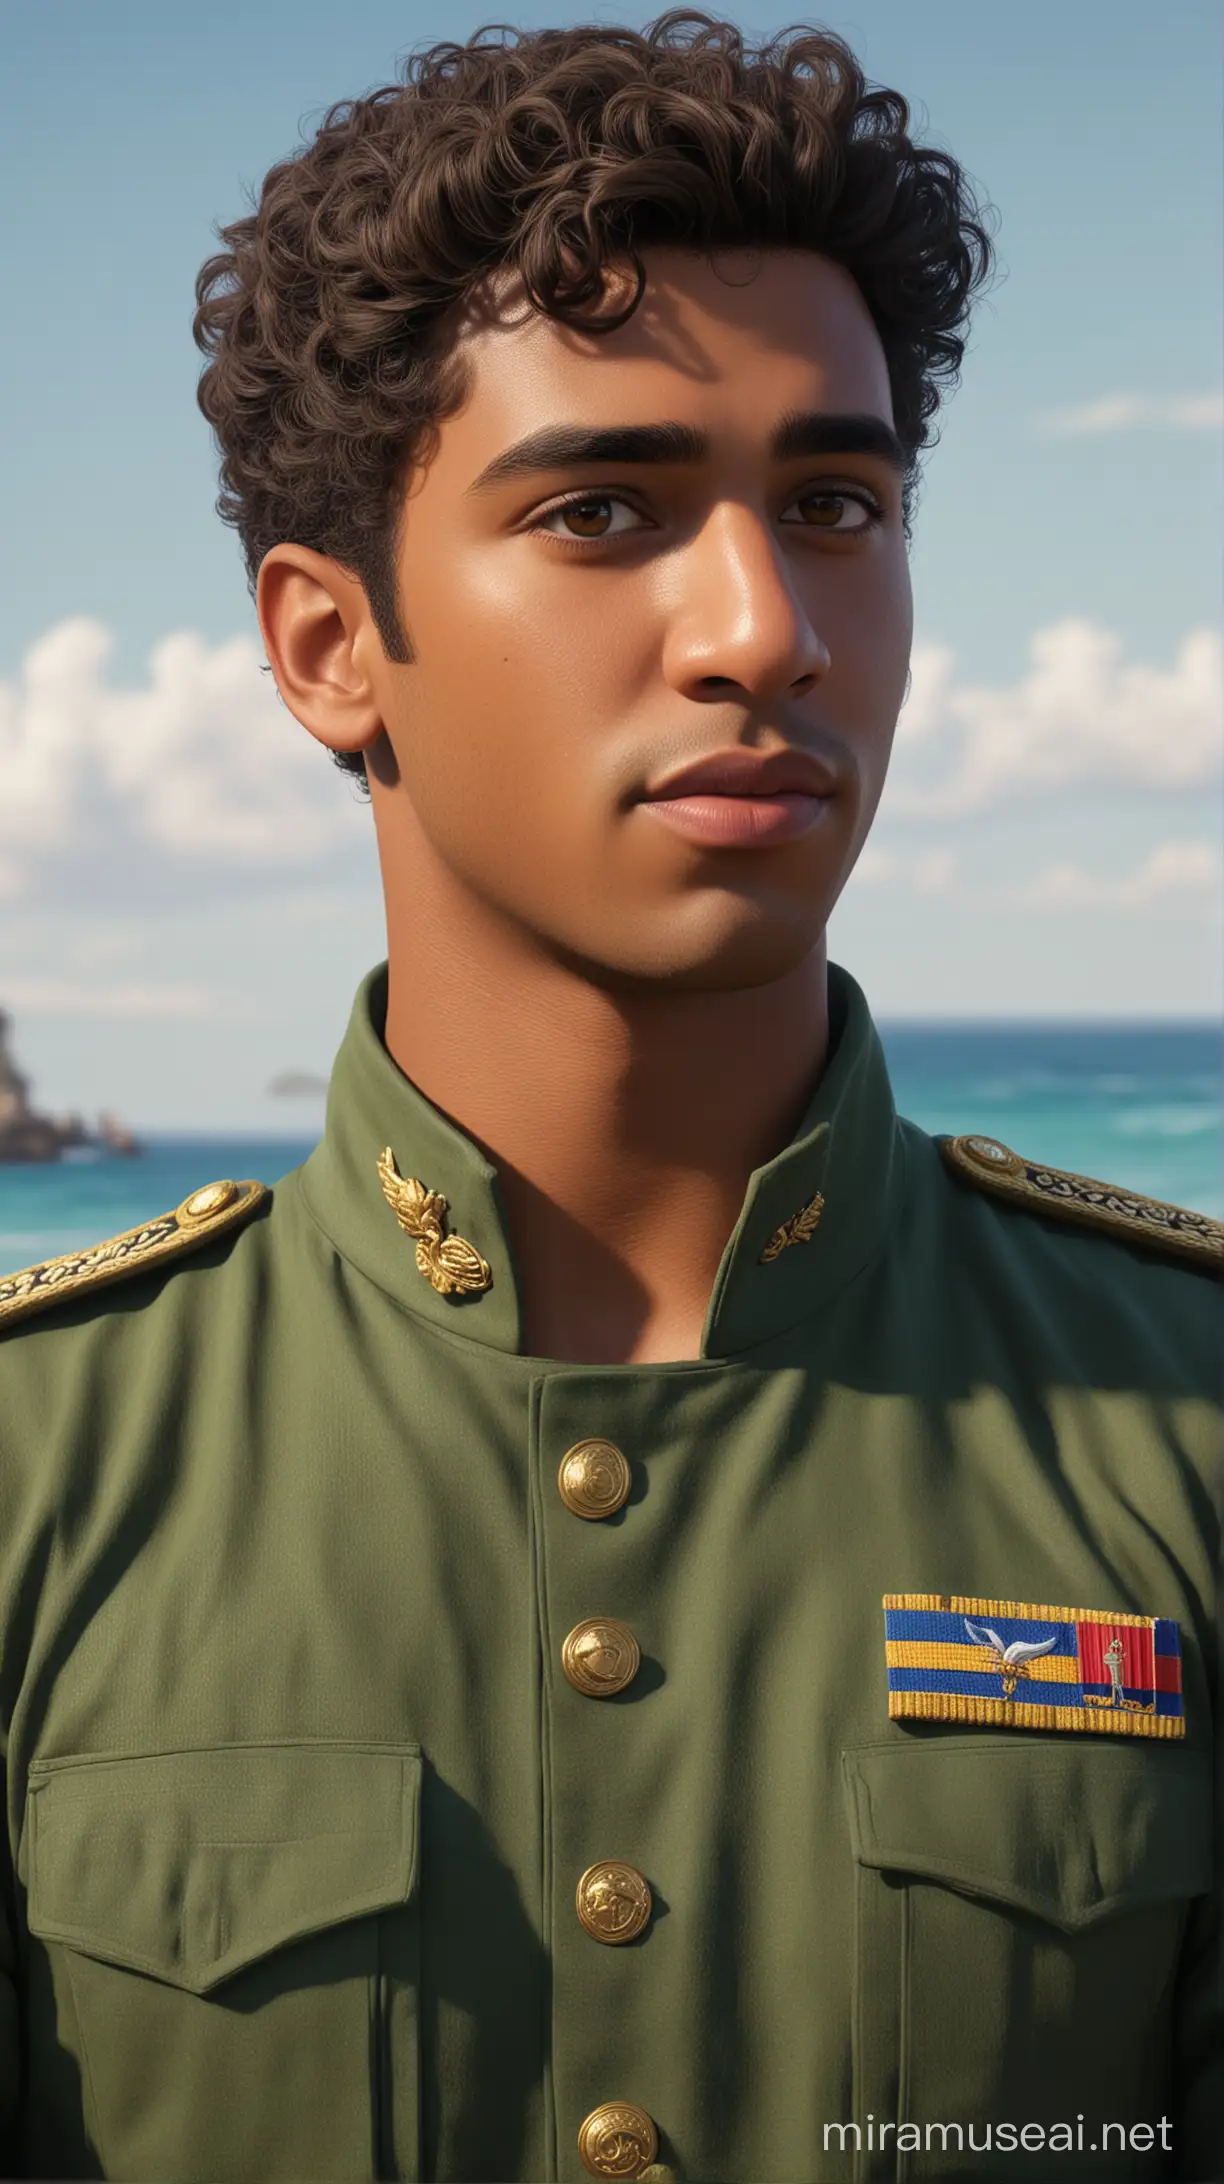 in a sea natural background military there are disney prince Naveen is  African American 21-years and short hair shaved at the curly sides and brown eyes and  long face and camouflage military uniform and navy and muscled an face beautiful 8k re solution ultra-realistic